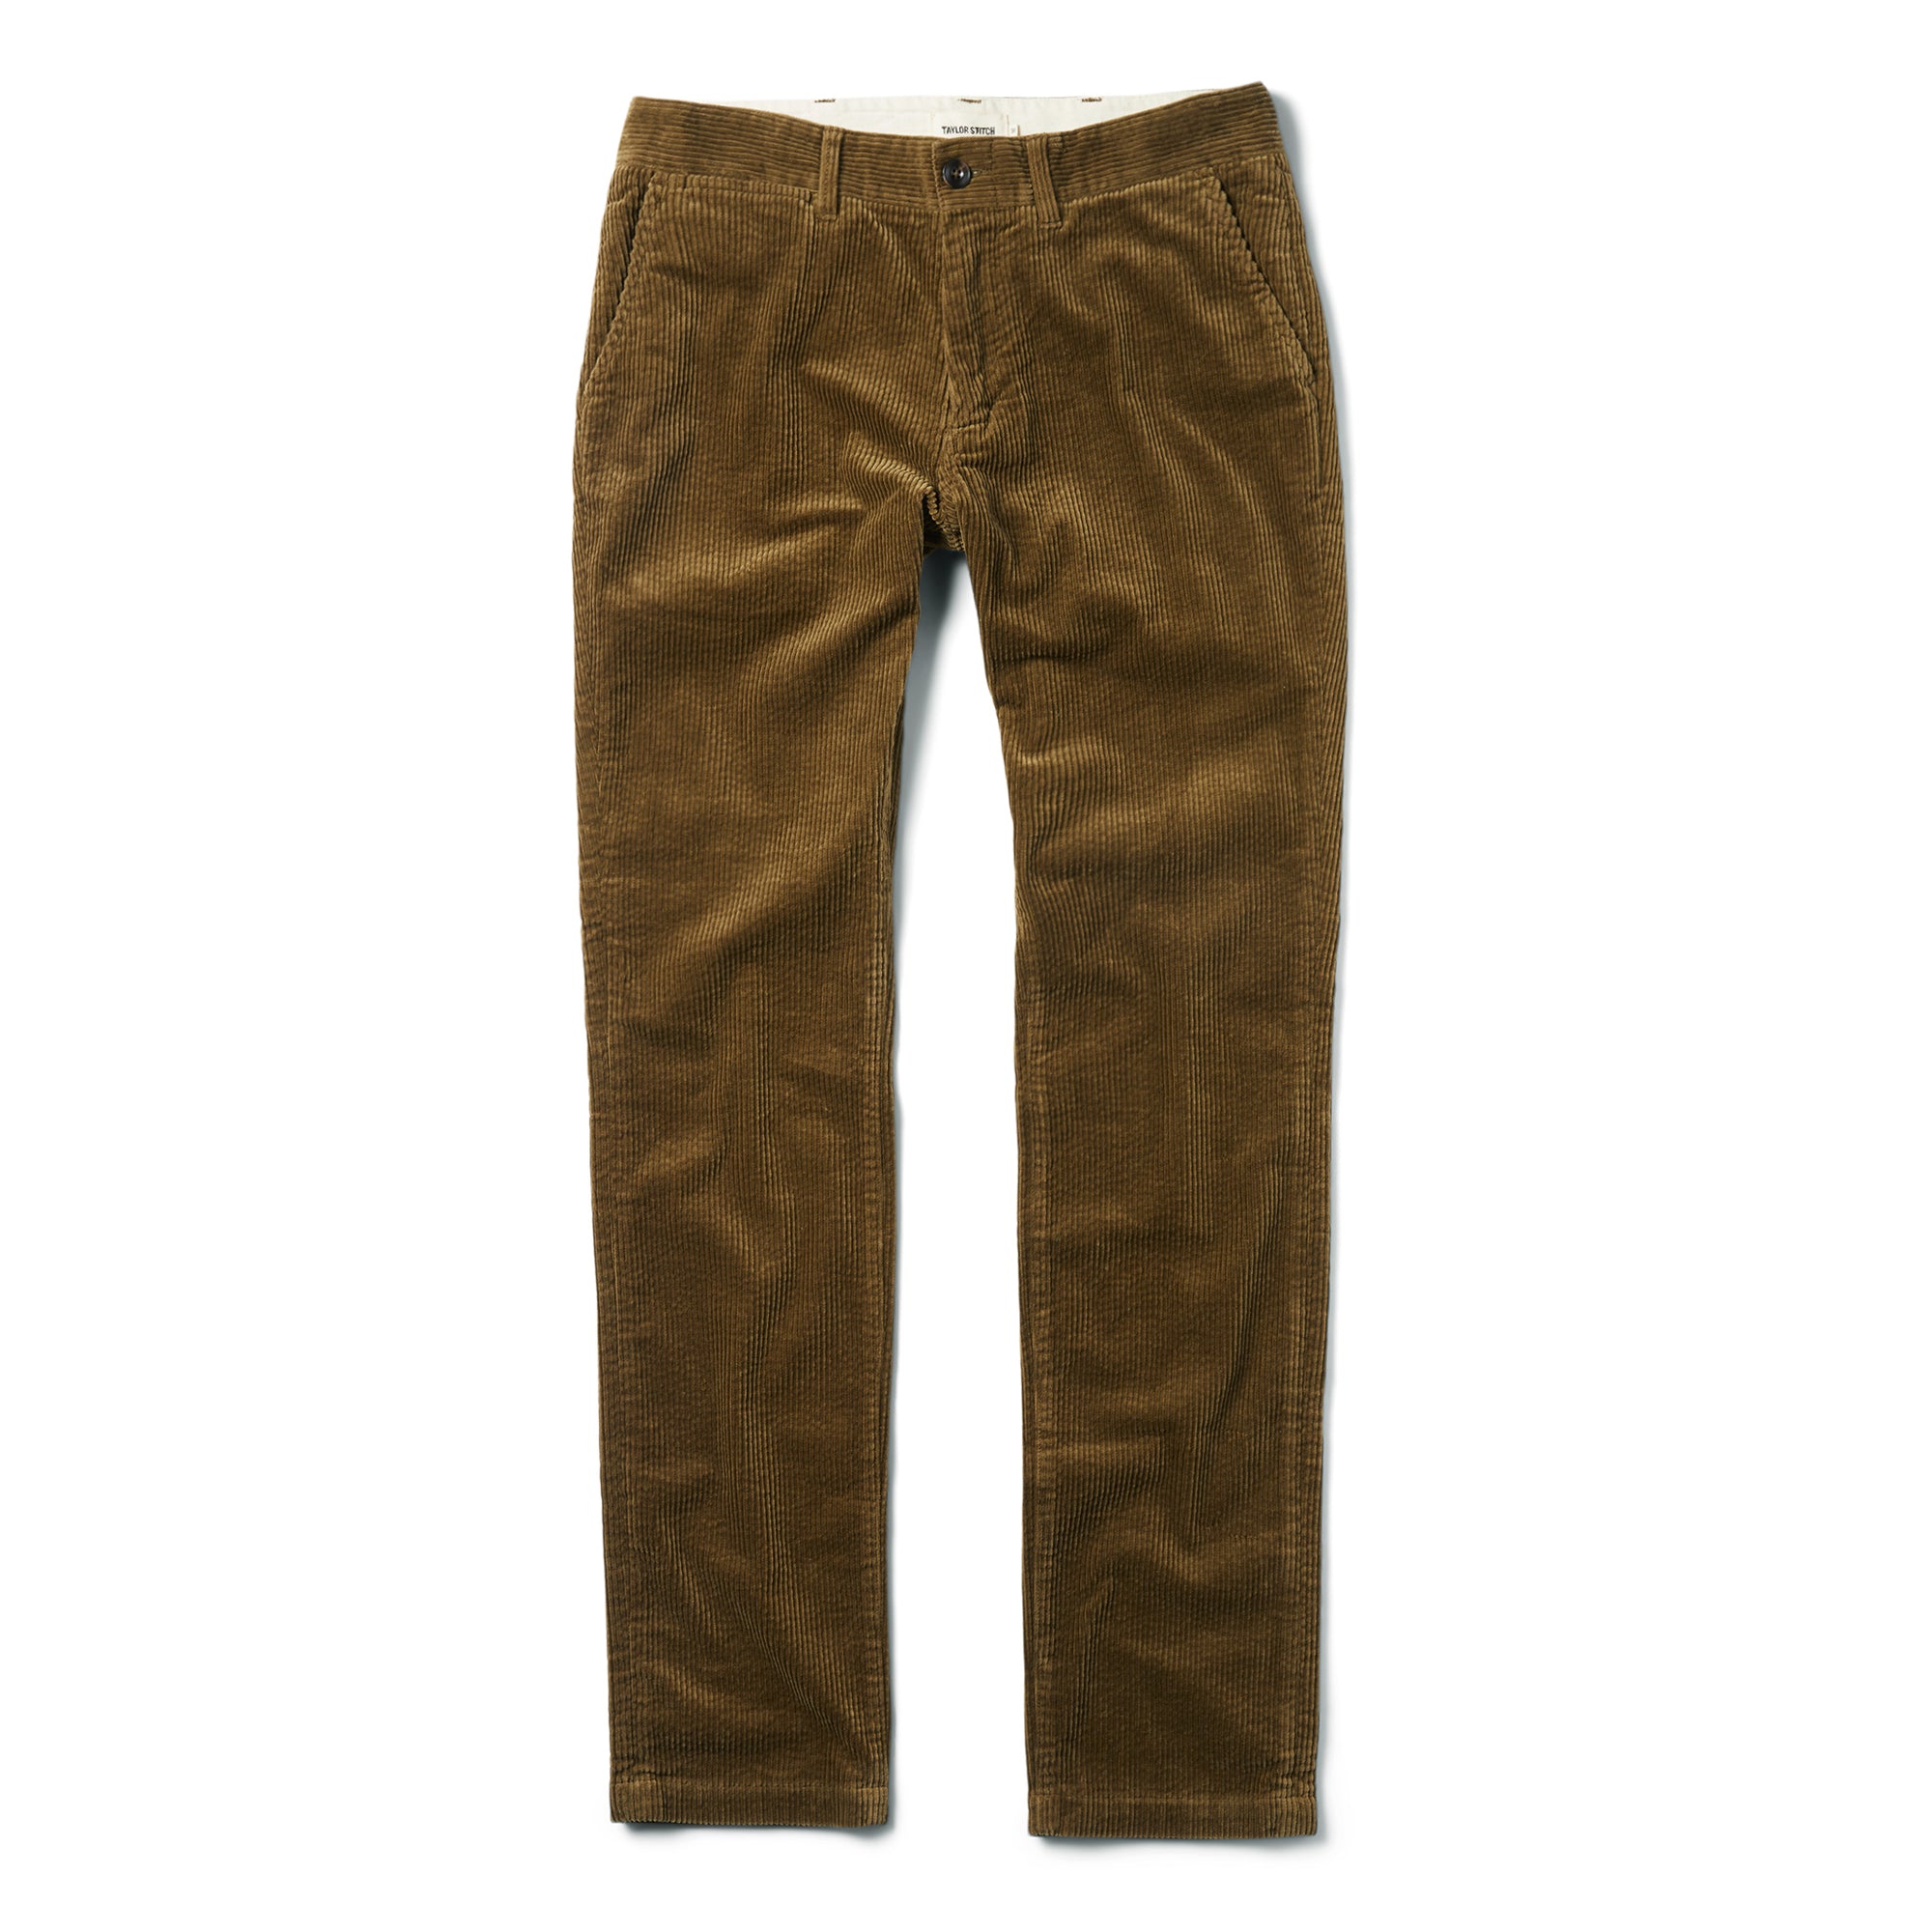 Taylor Stitch Slim Foundation Pant in Olive Cord